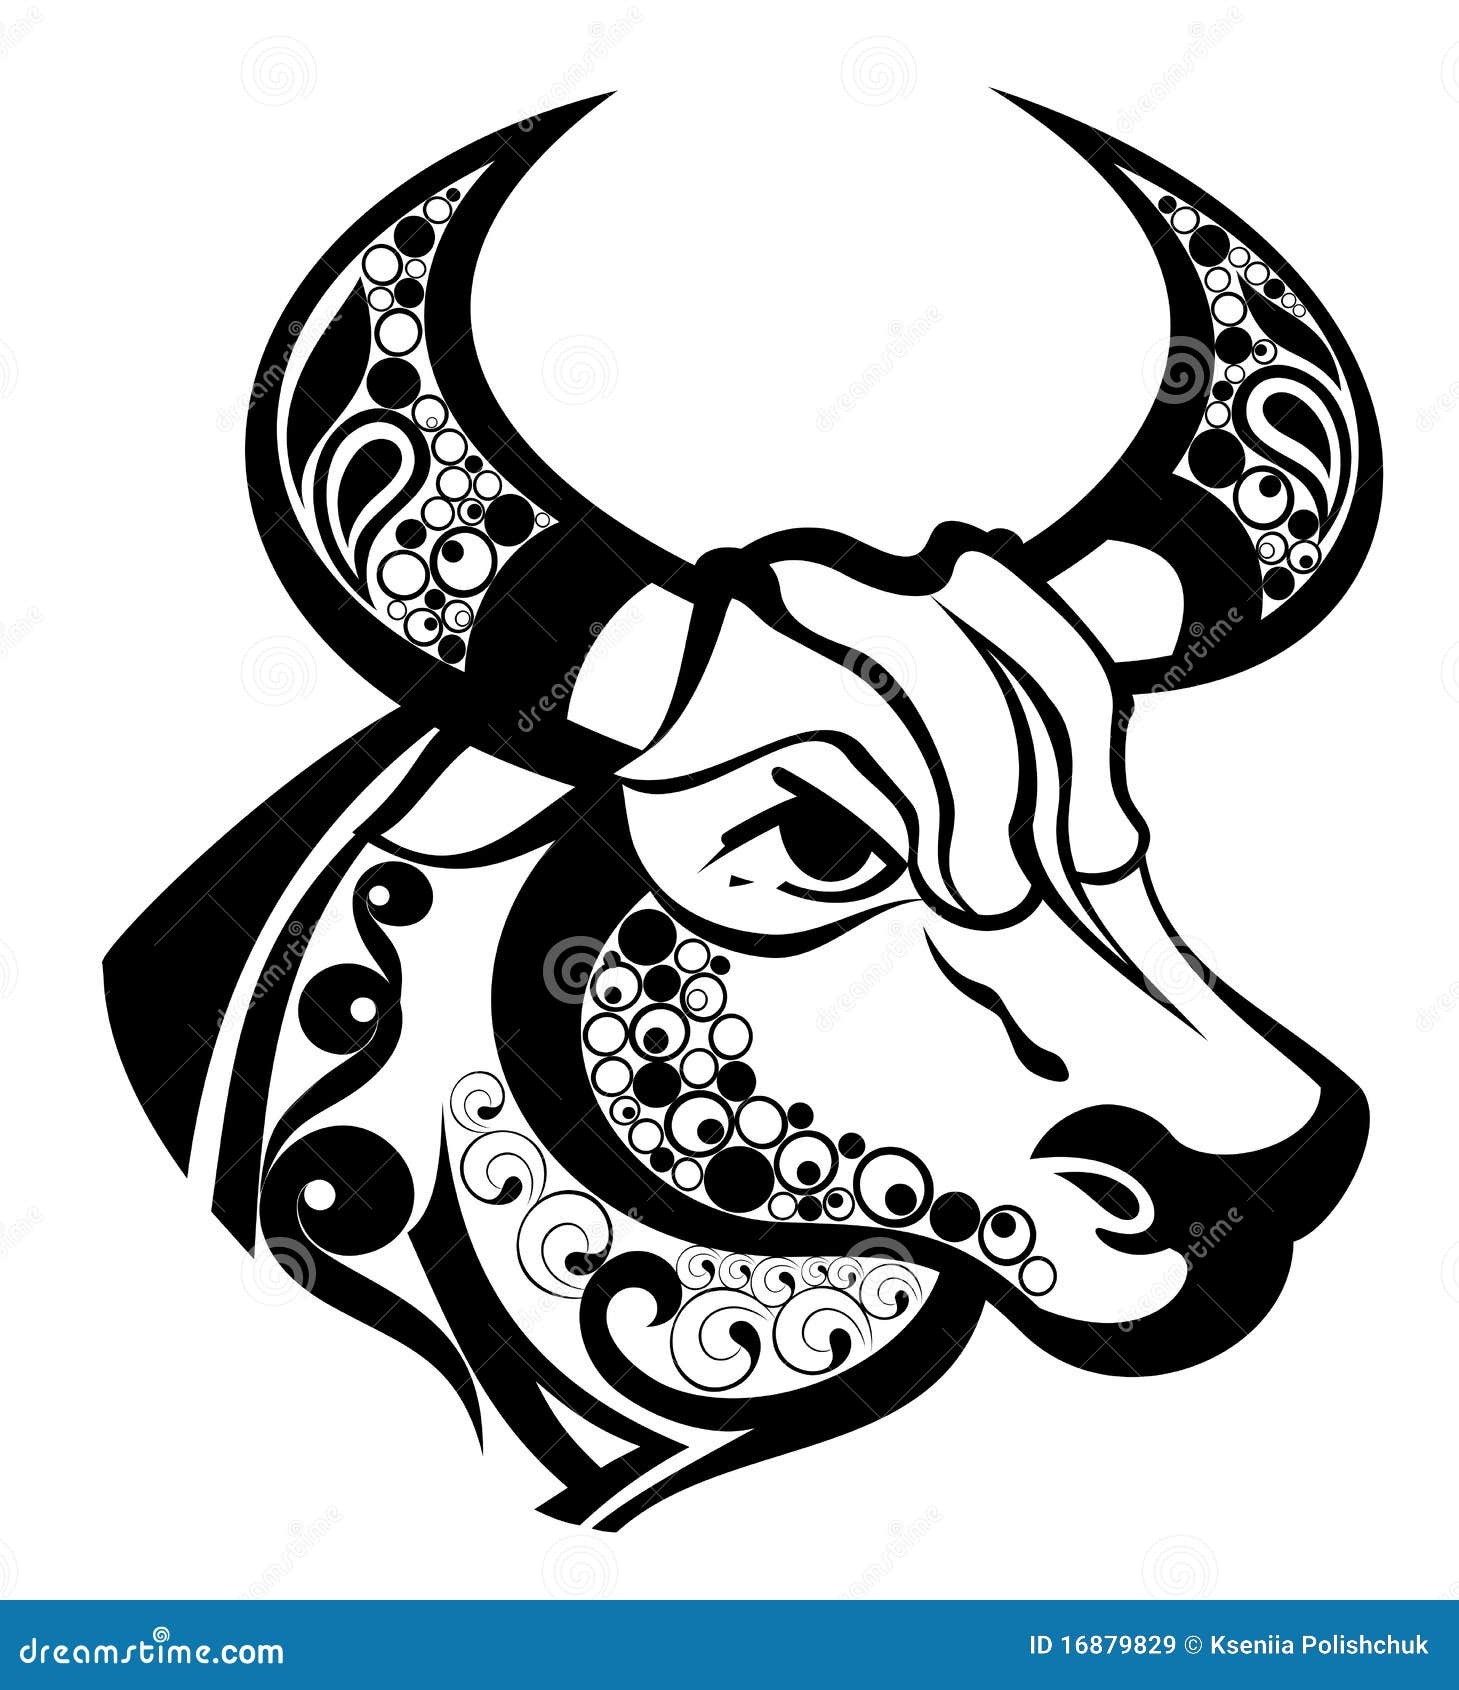 70+ Taurus Tattoo Designs Pictures Stock Illustrations, Royalty-Free Vector  Graphics & Clip Art - iStock